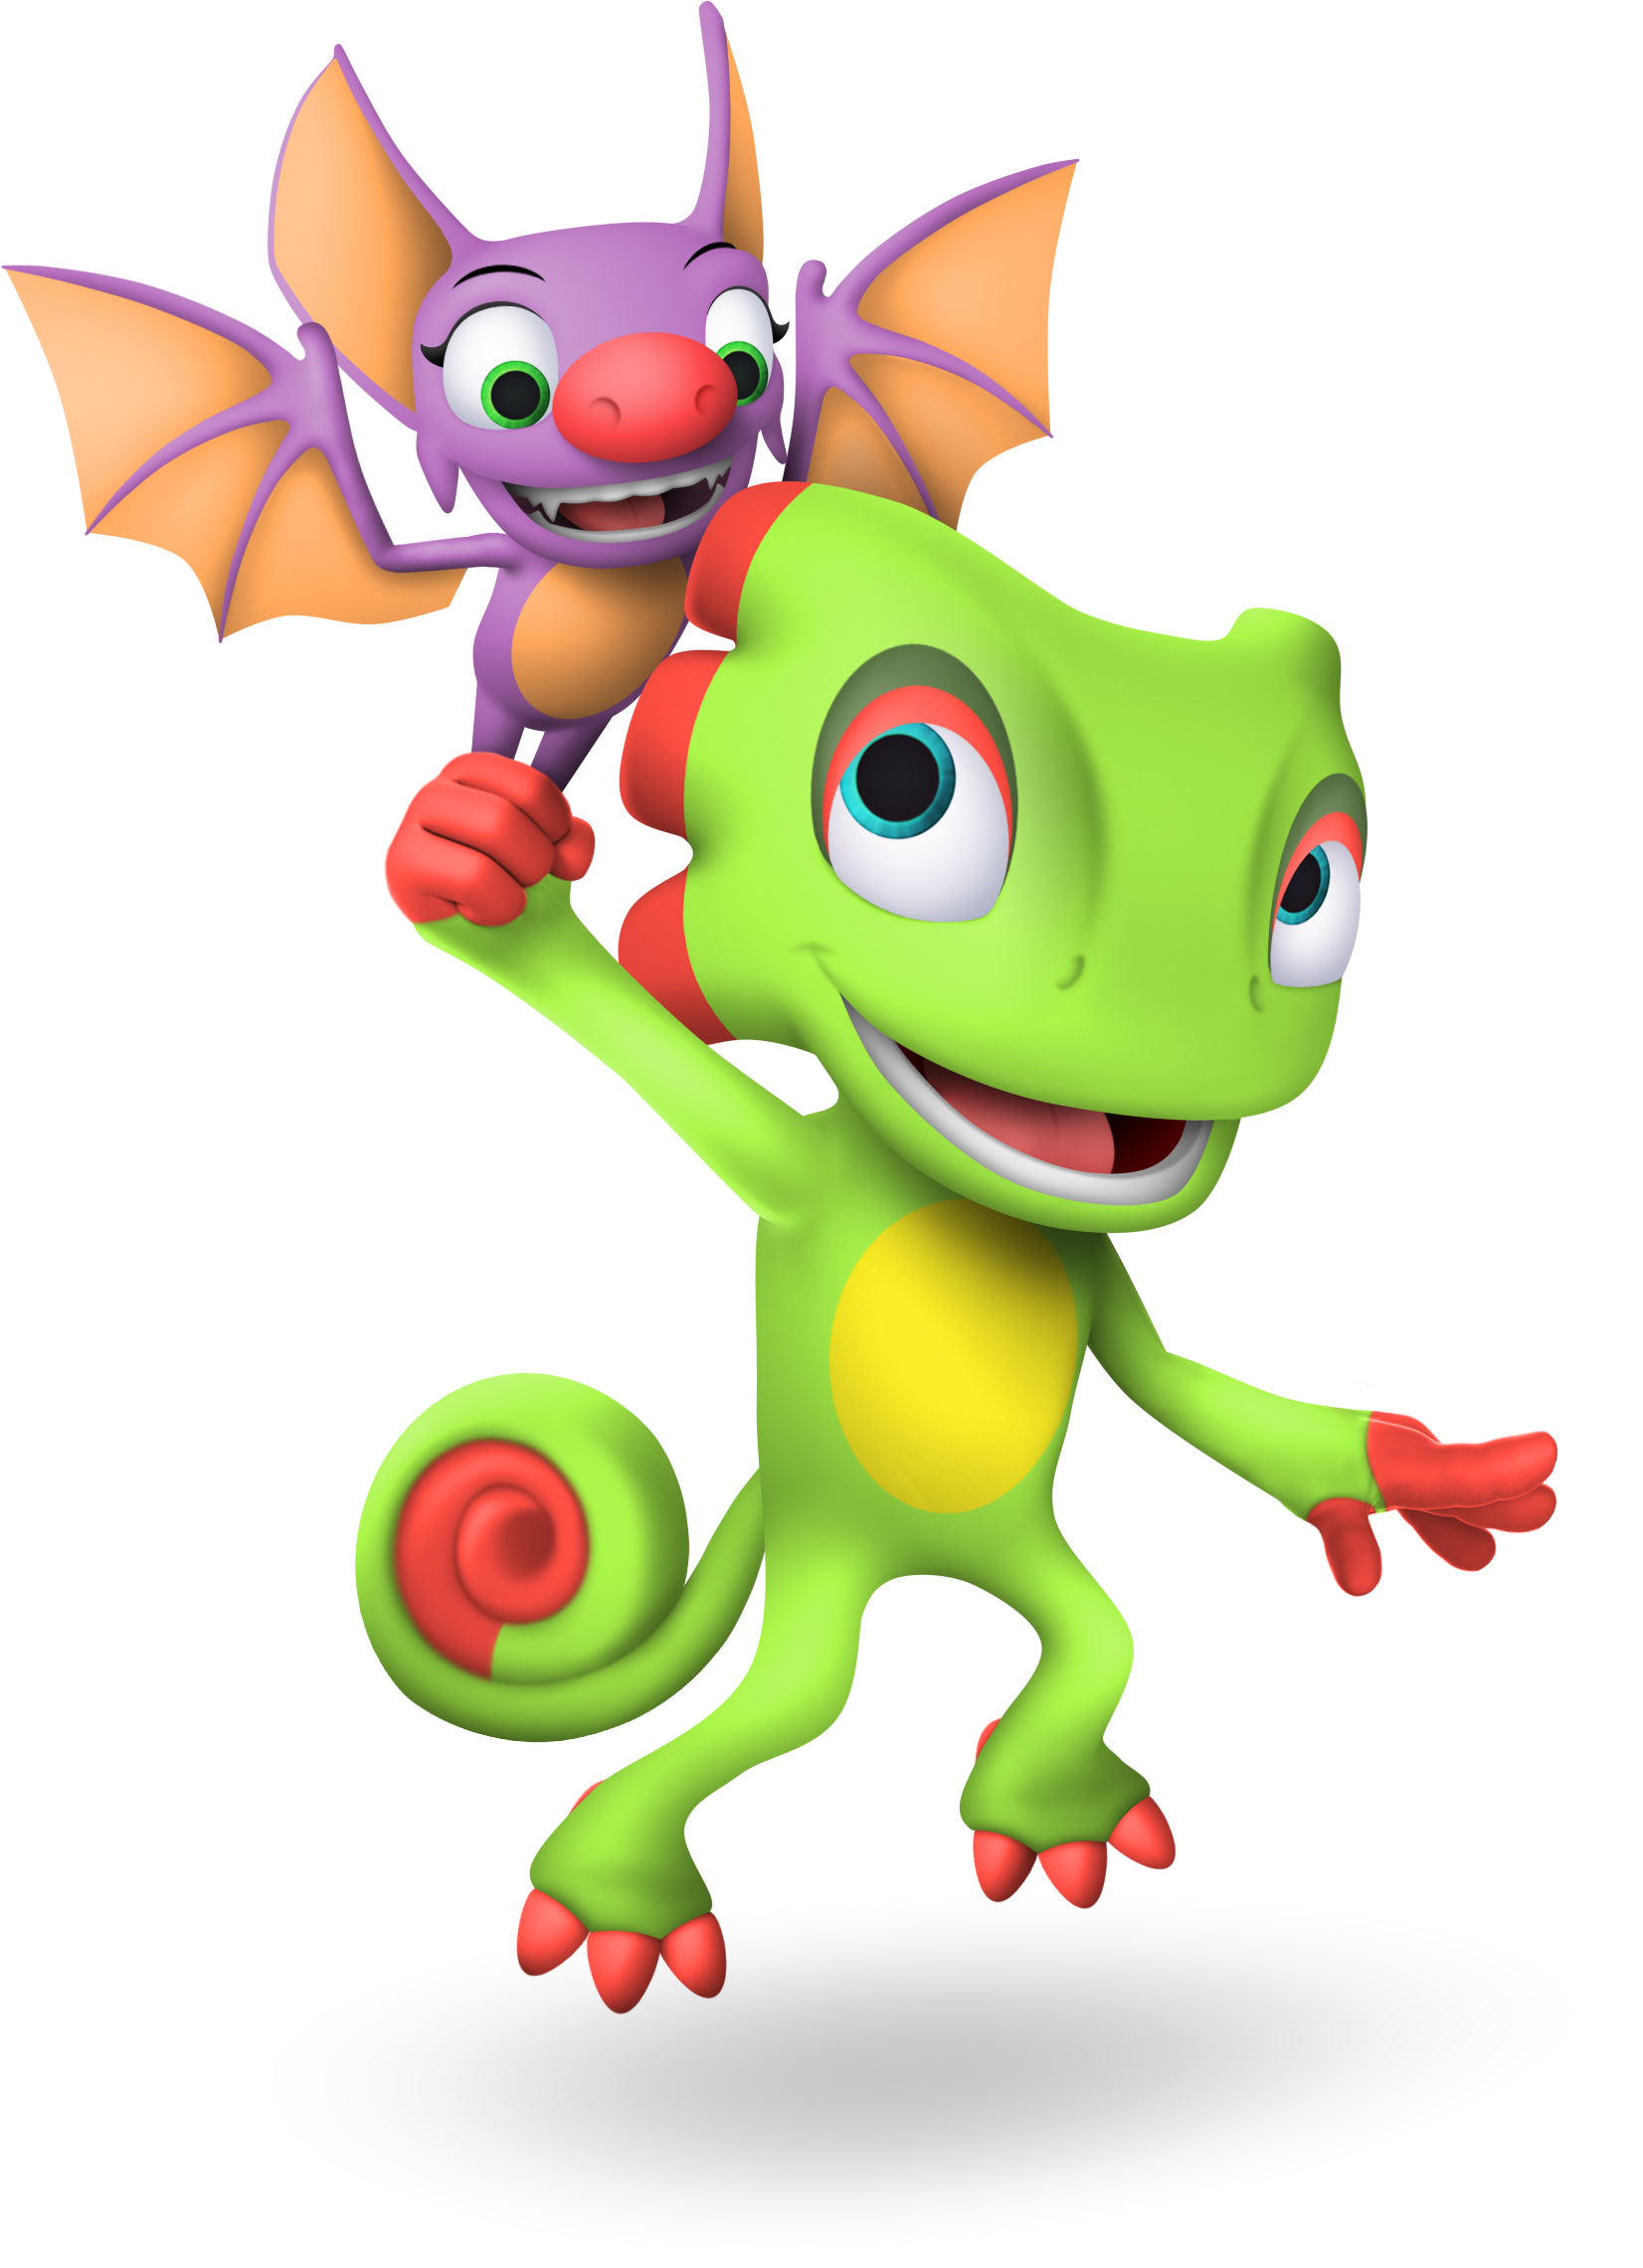 Yooka and Laylee Join the Battle V.2 by Shadow364FSF on DeviantArt